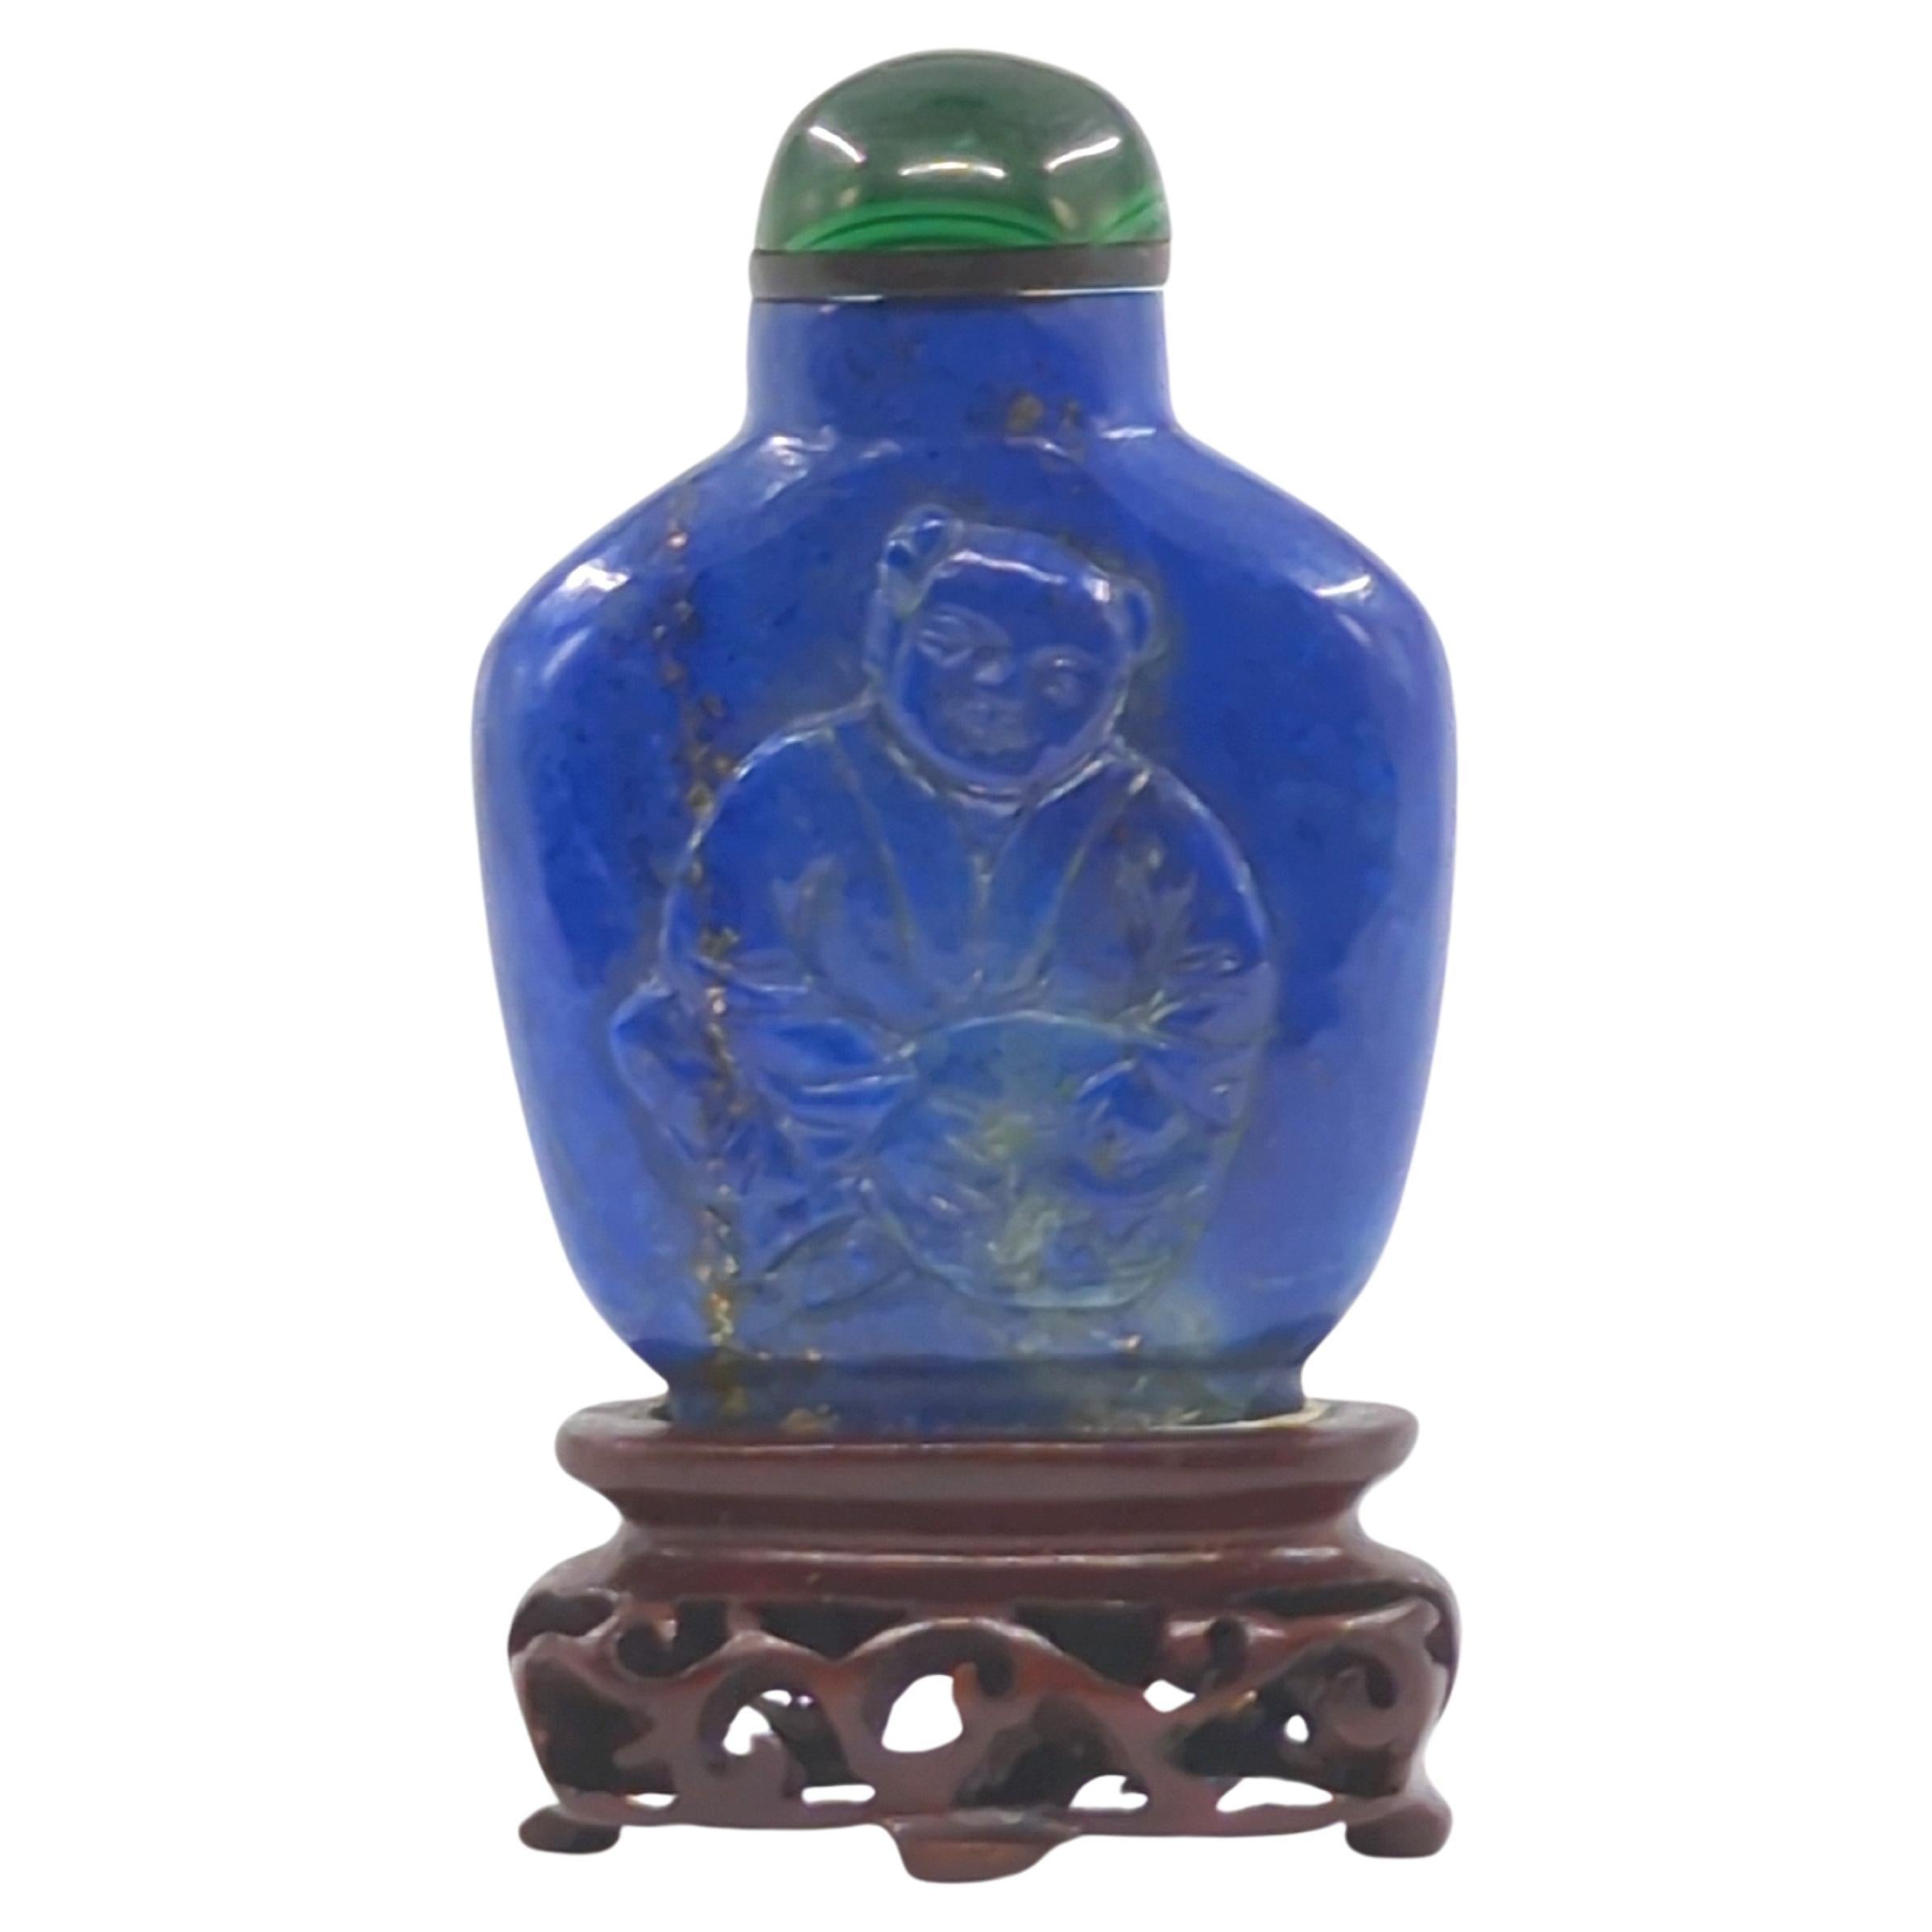 Antique Chinese Lapis Lazuli Relief Carved Snuff Bottle on Stand c.1920